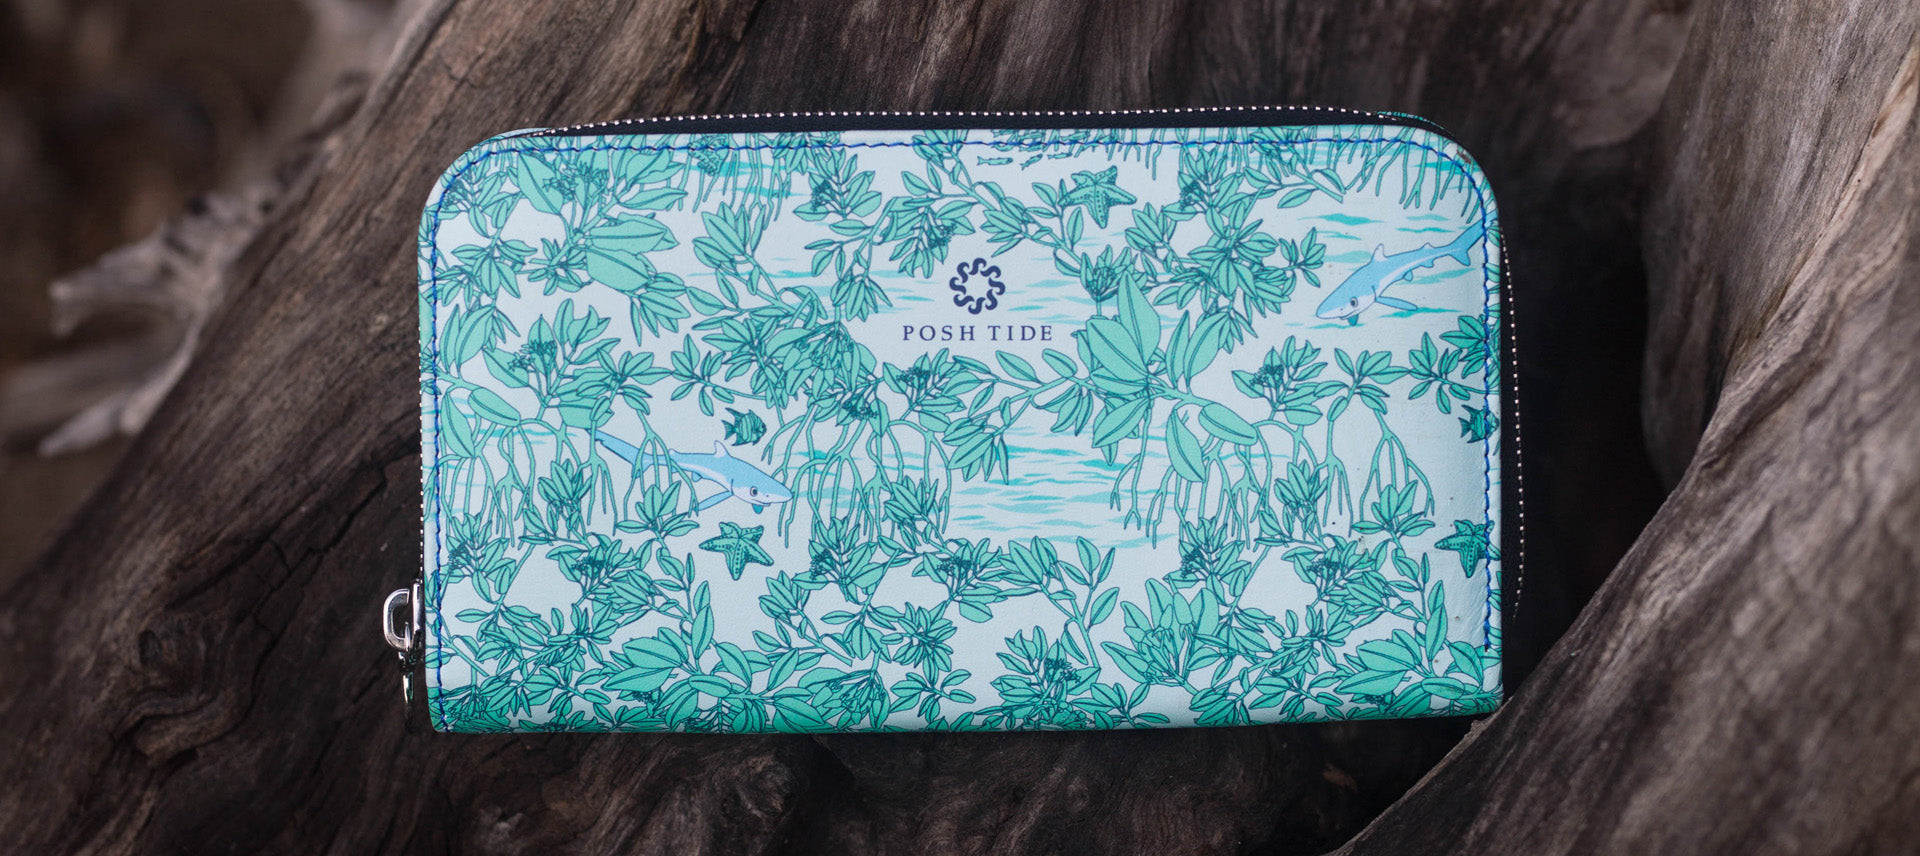 close up view of Posh Tide's leather zip around long wallet with illustrations of mangroves in blue.